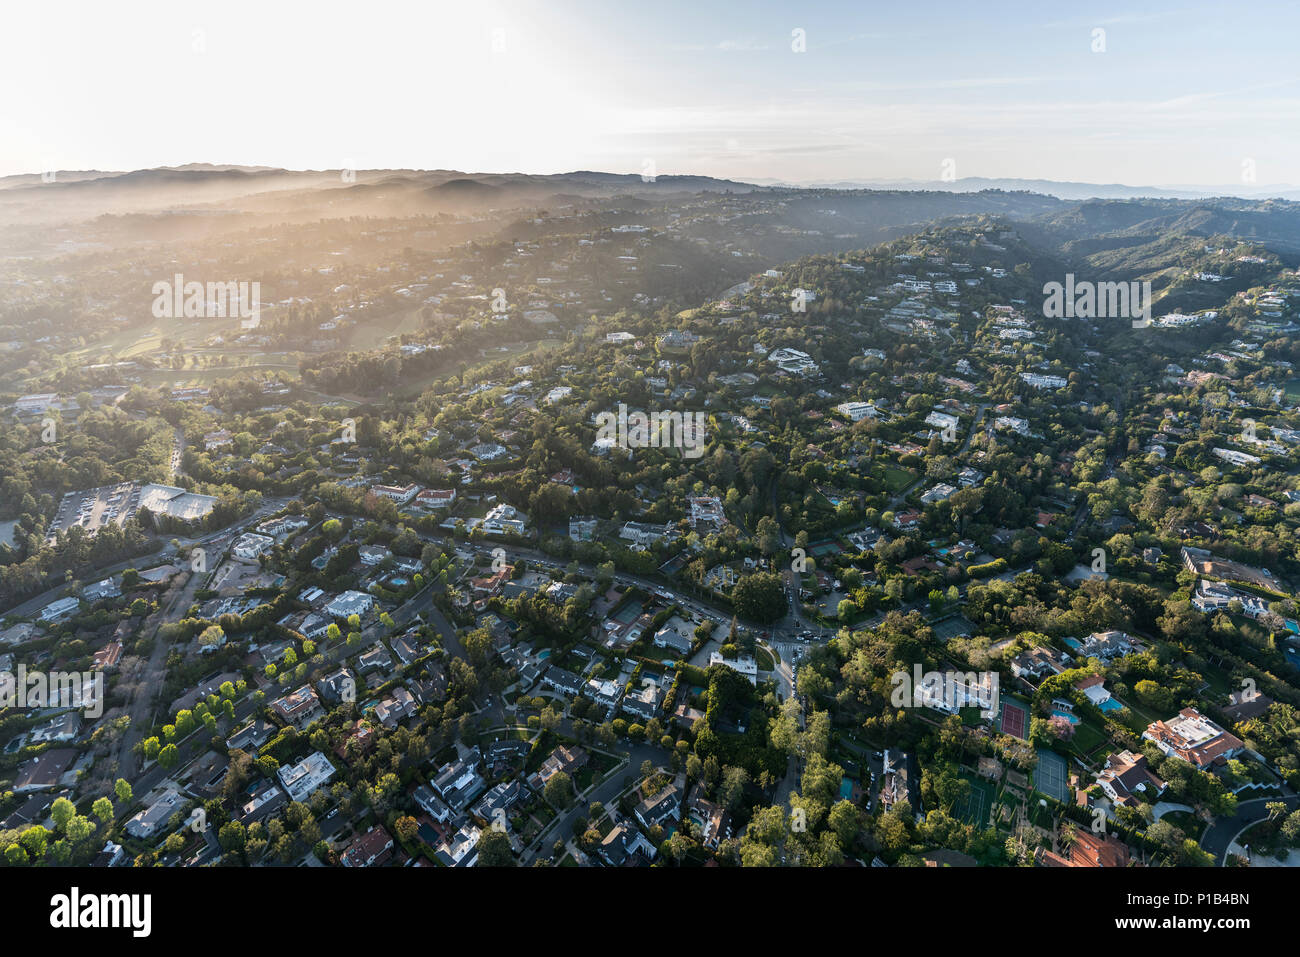 Aerial view of affluent homes and estates in the Bel Air area of Los Angeles, California. Stock Photo